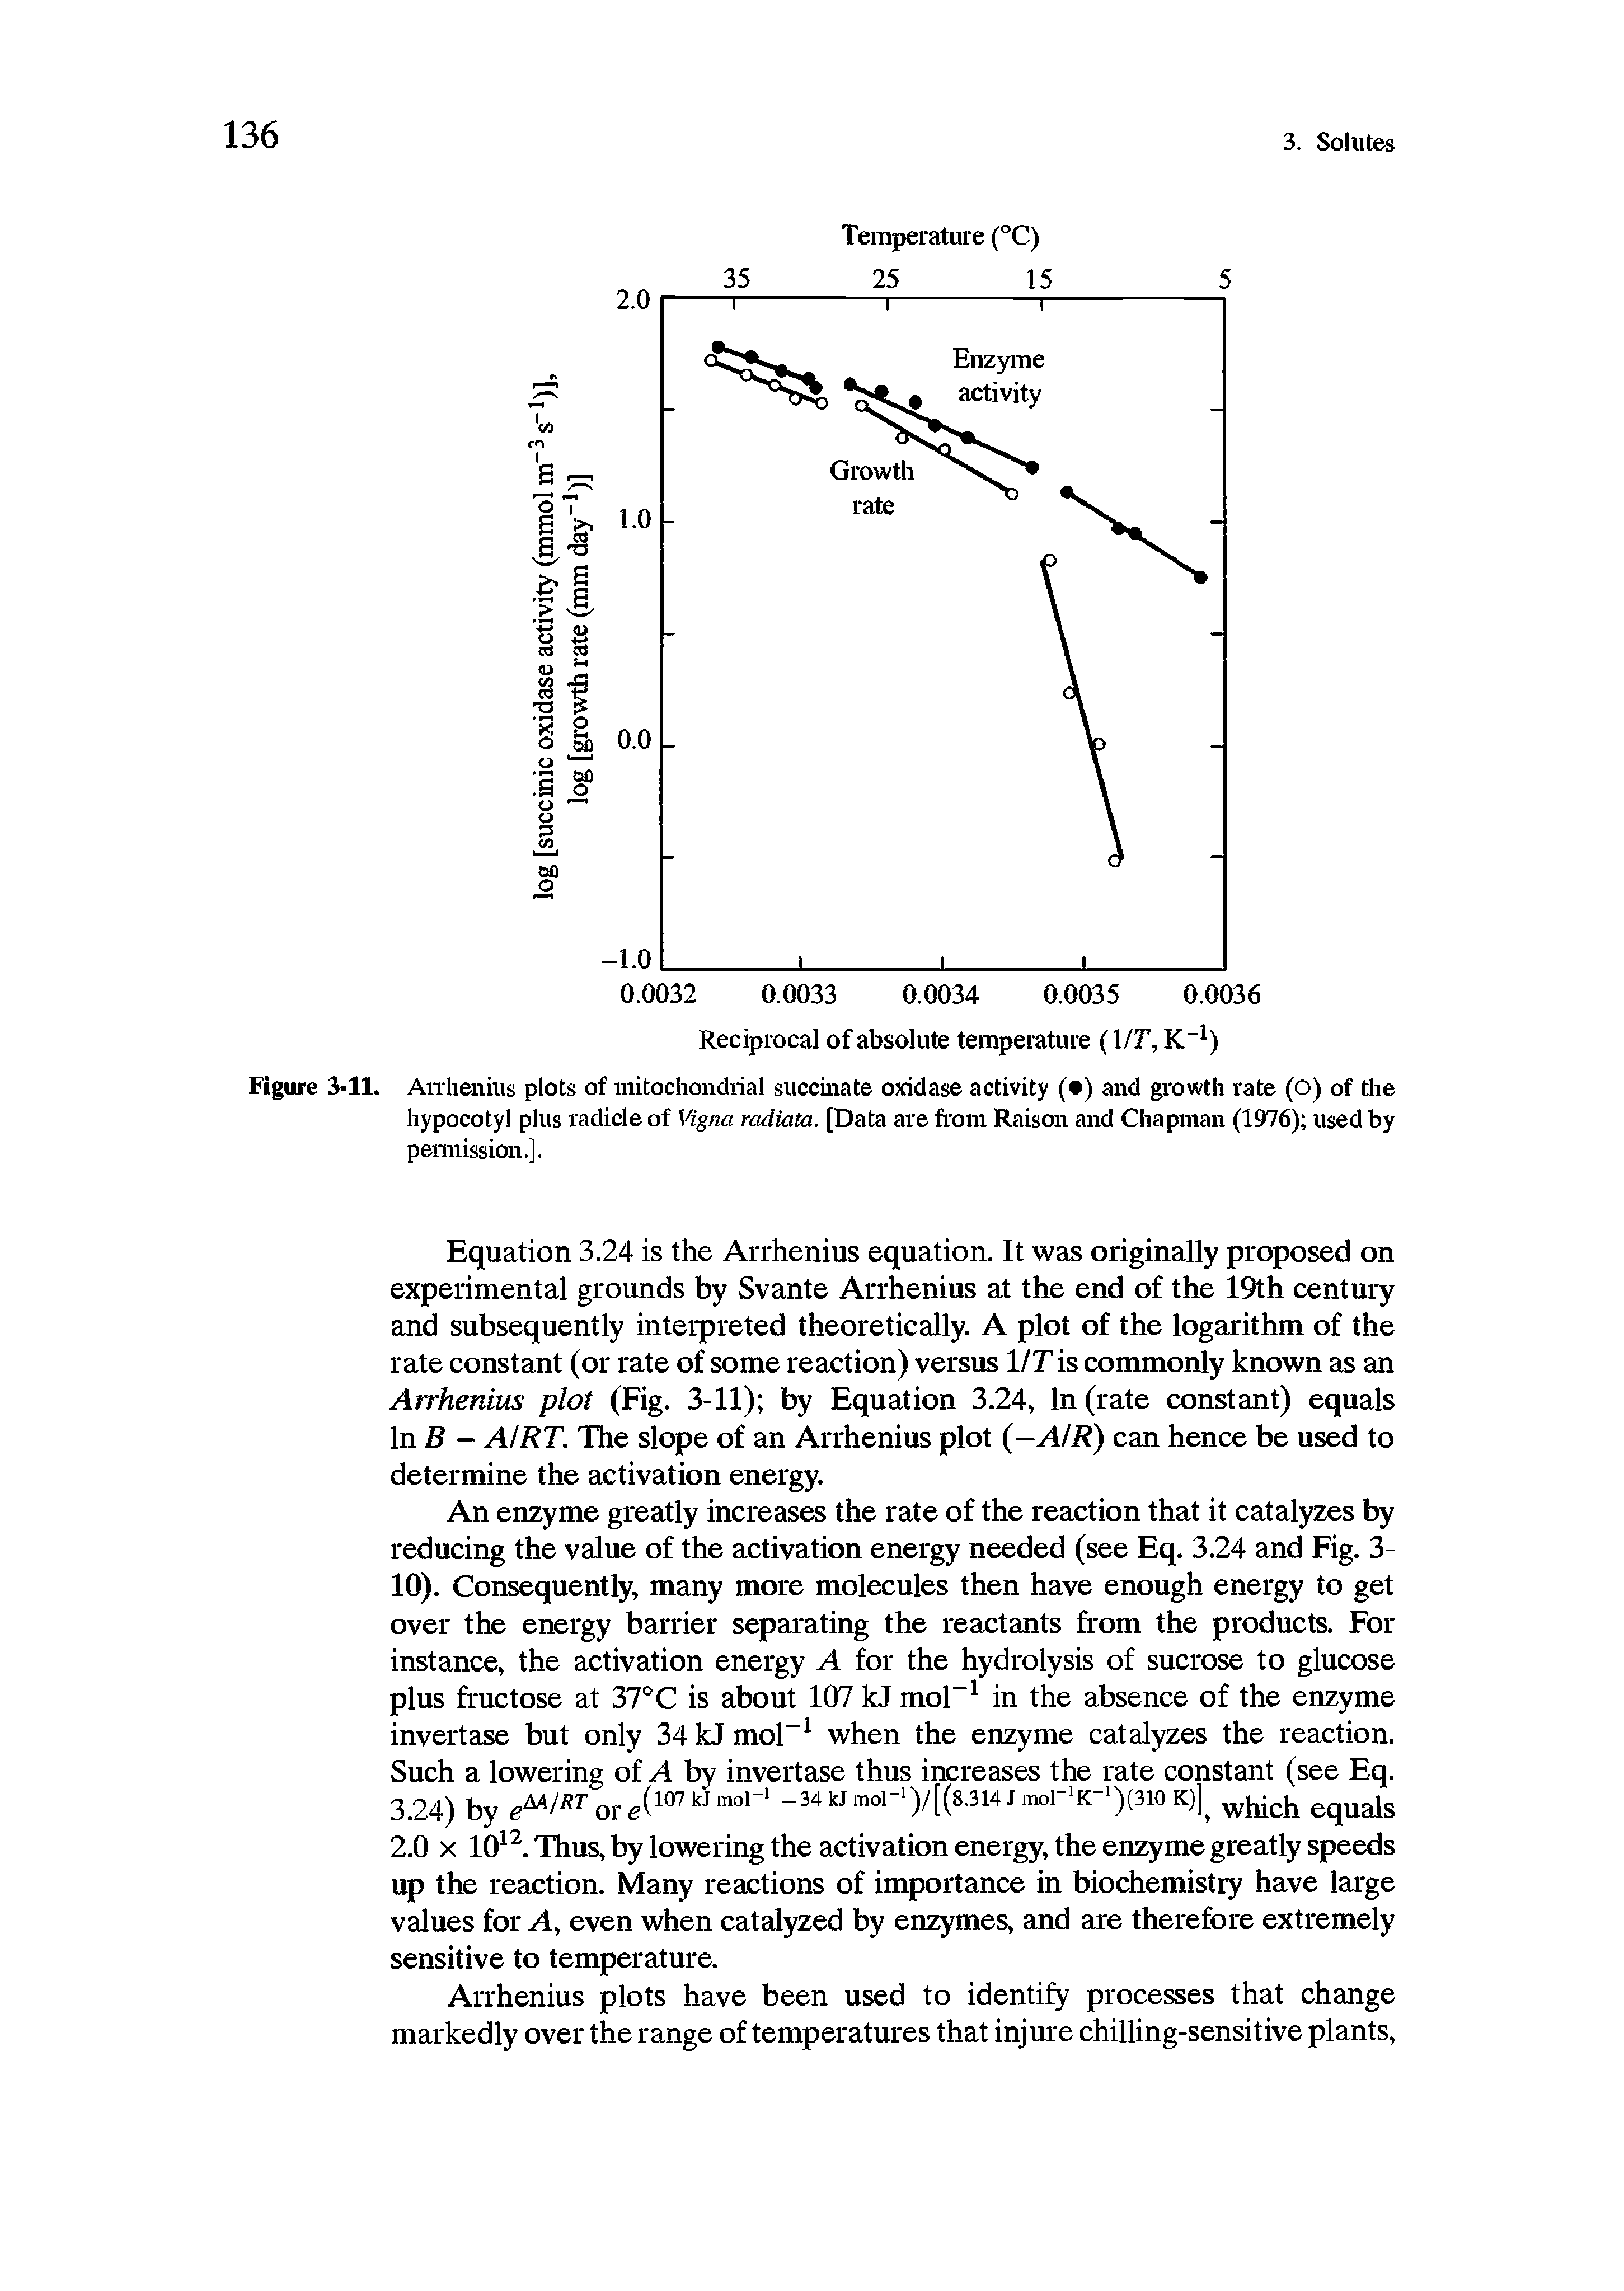 Figure 3-11. Arrhenius plots of mitochondrial succinate oxidase activity ( ) and growth rate (O) of the hypocotyl plus radicle of Vigna radiata. [Data are from Raison and Chapman (1976) used by permission.].